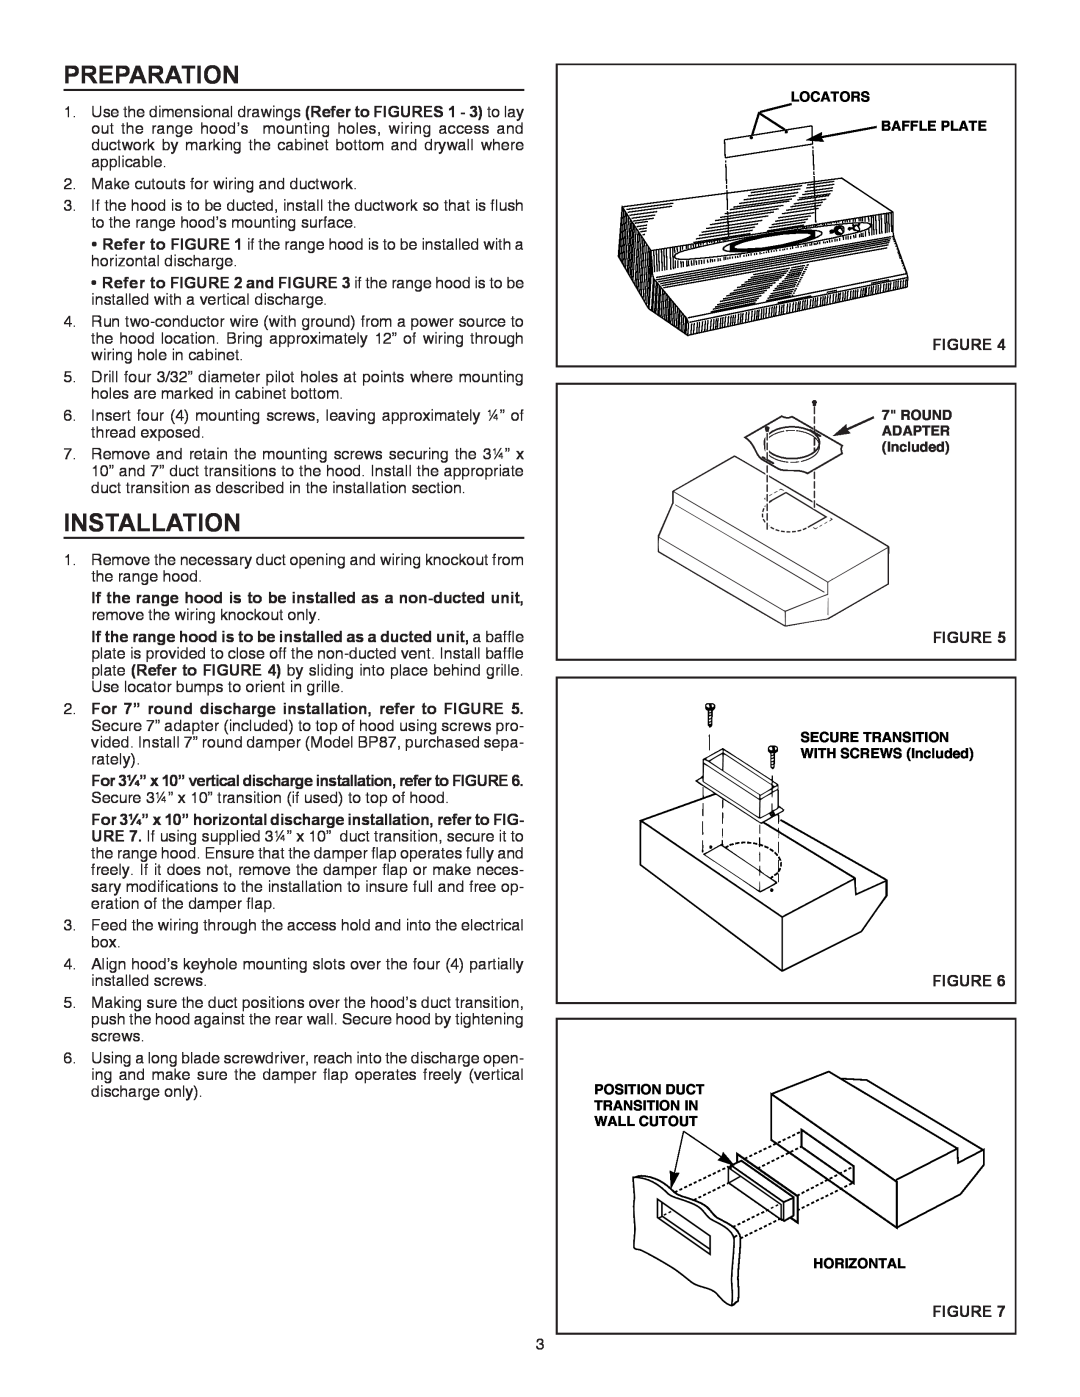 Broan QT230SS installation instructions Preparation, Installation, For 7” round discharge installation, refer to FIGURE 